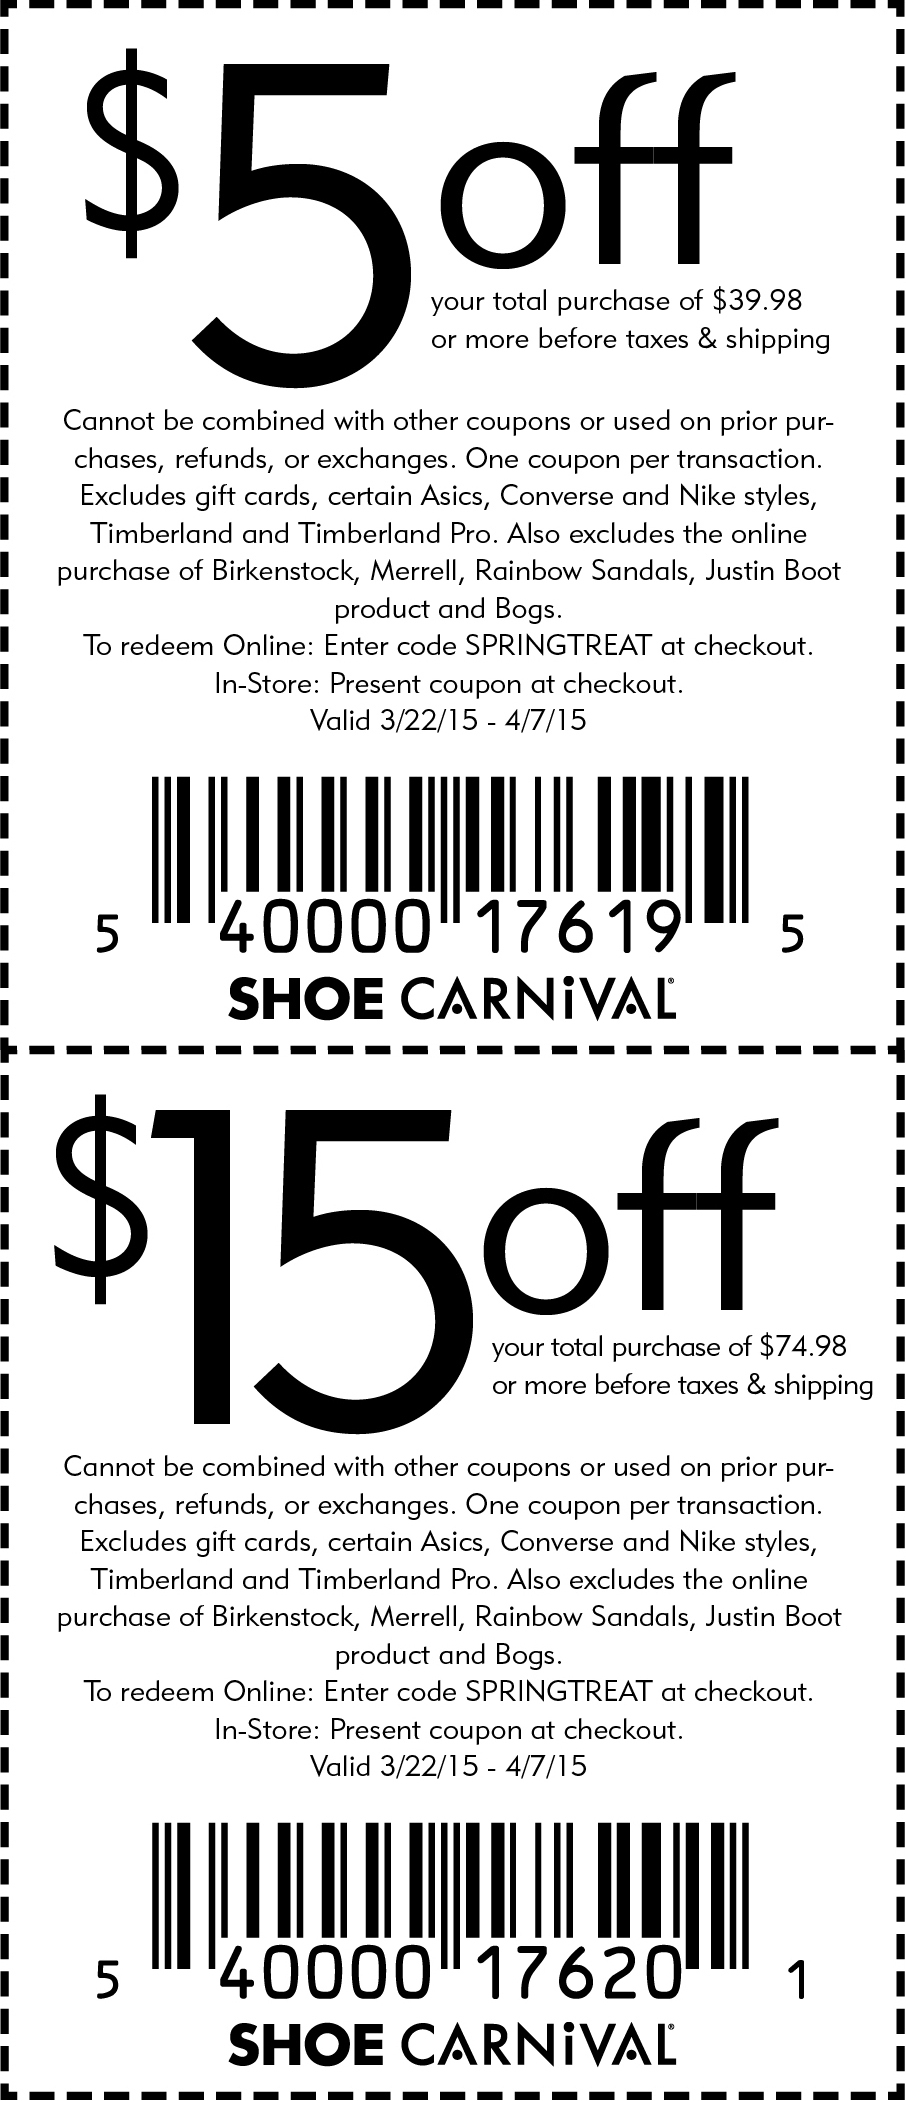 New Dsw Coupons | Wedding Inspirations - Free Printable Coupons For Dsw Shoes